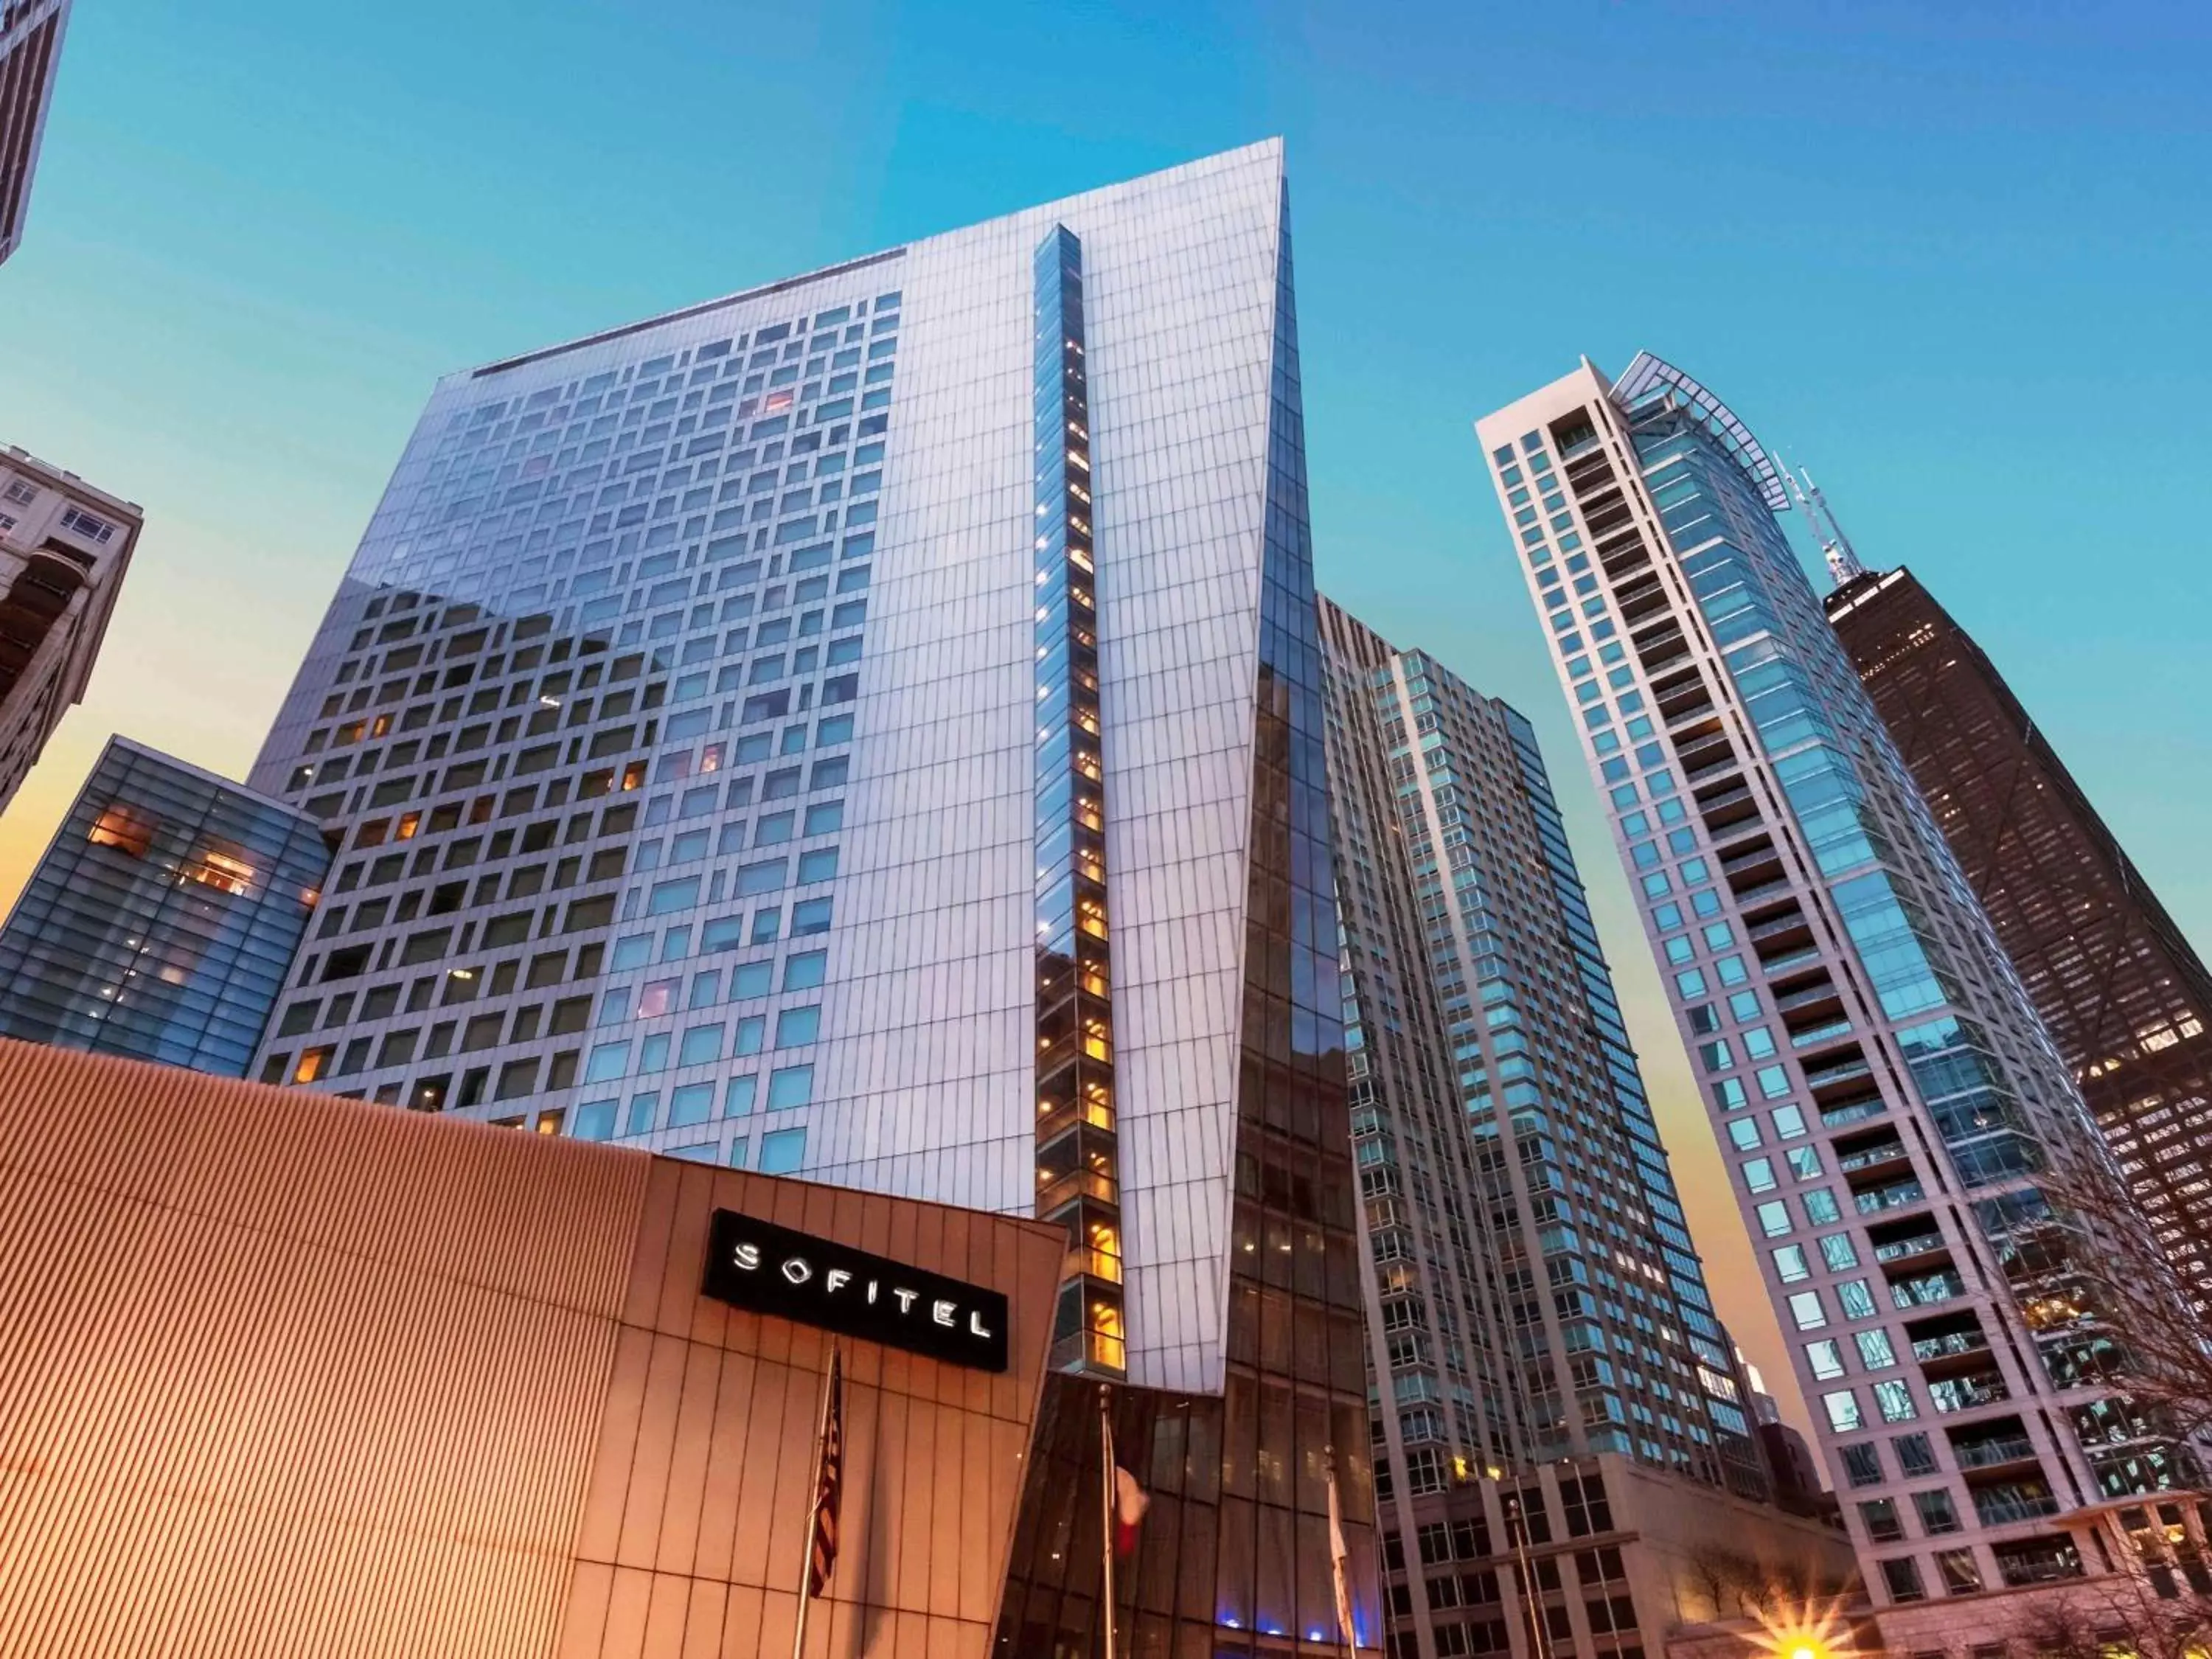 Property building in Sofitel Chicago Magnificent Mile